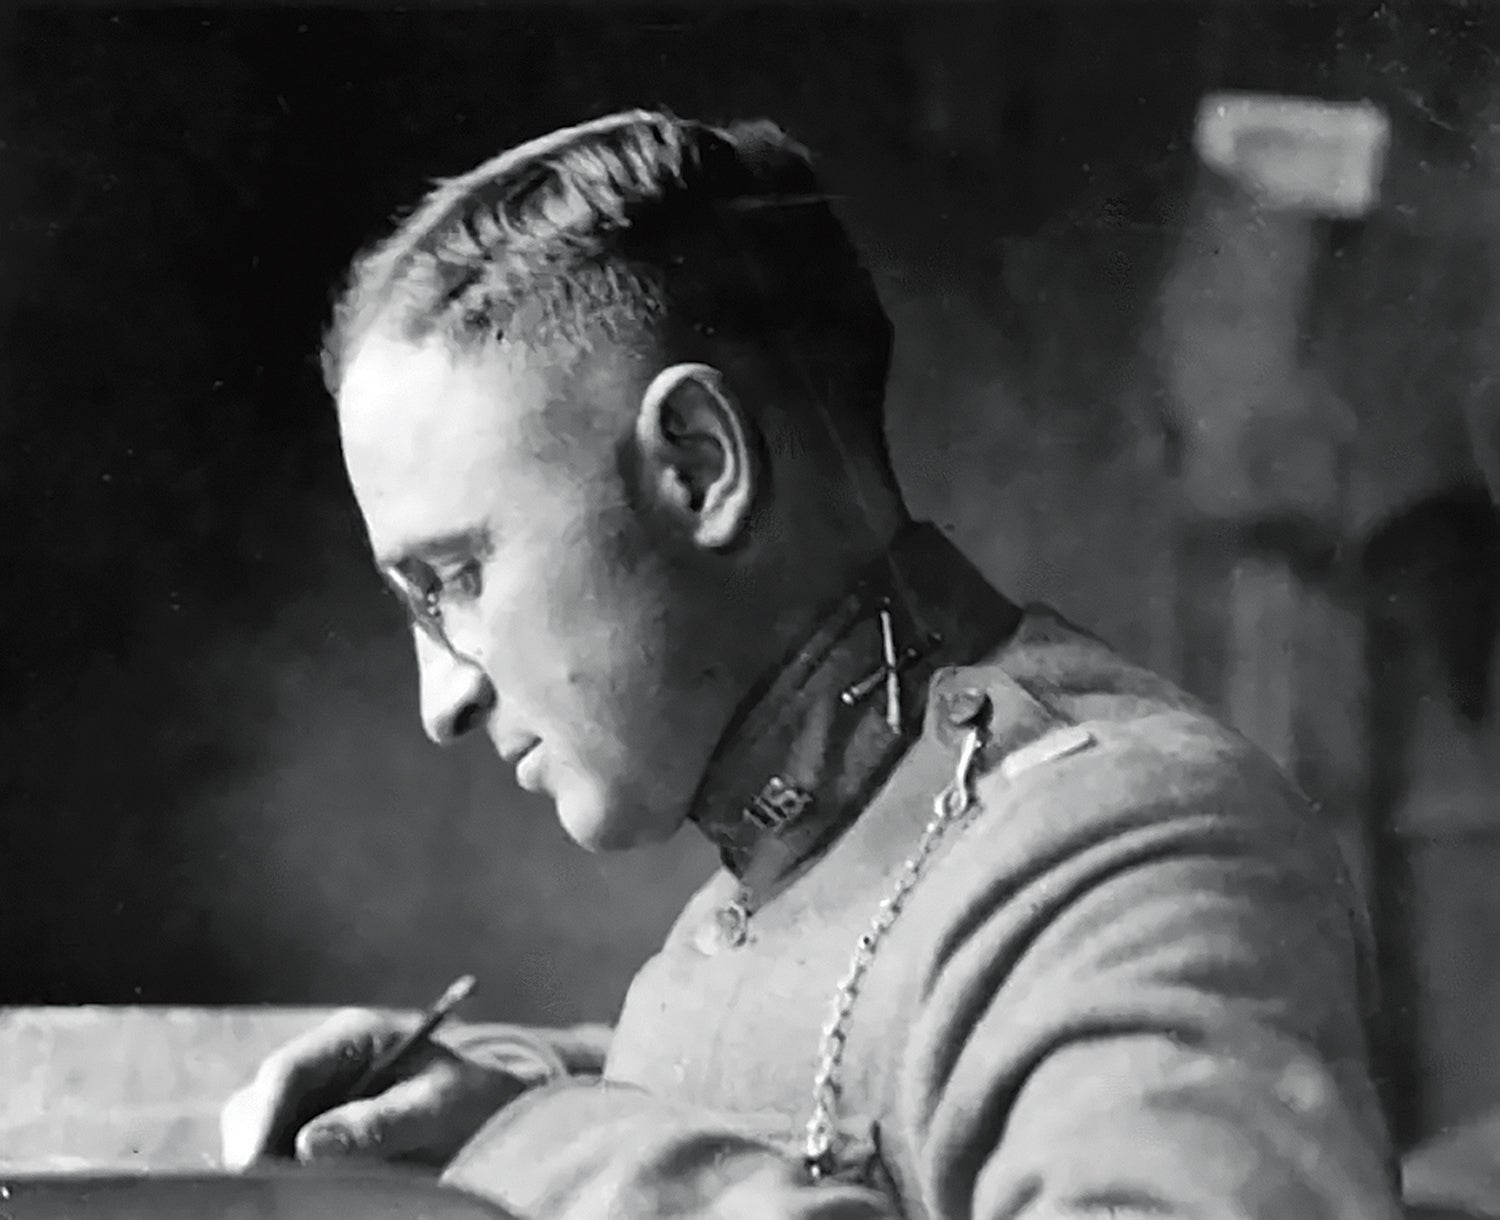 Capt. Harry Truman of the 129th Field Artillery. (Credit: National Park Service)